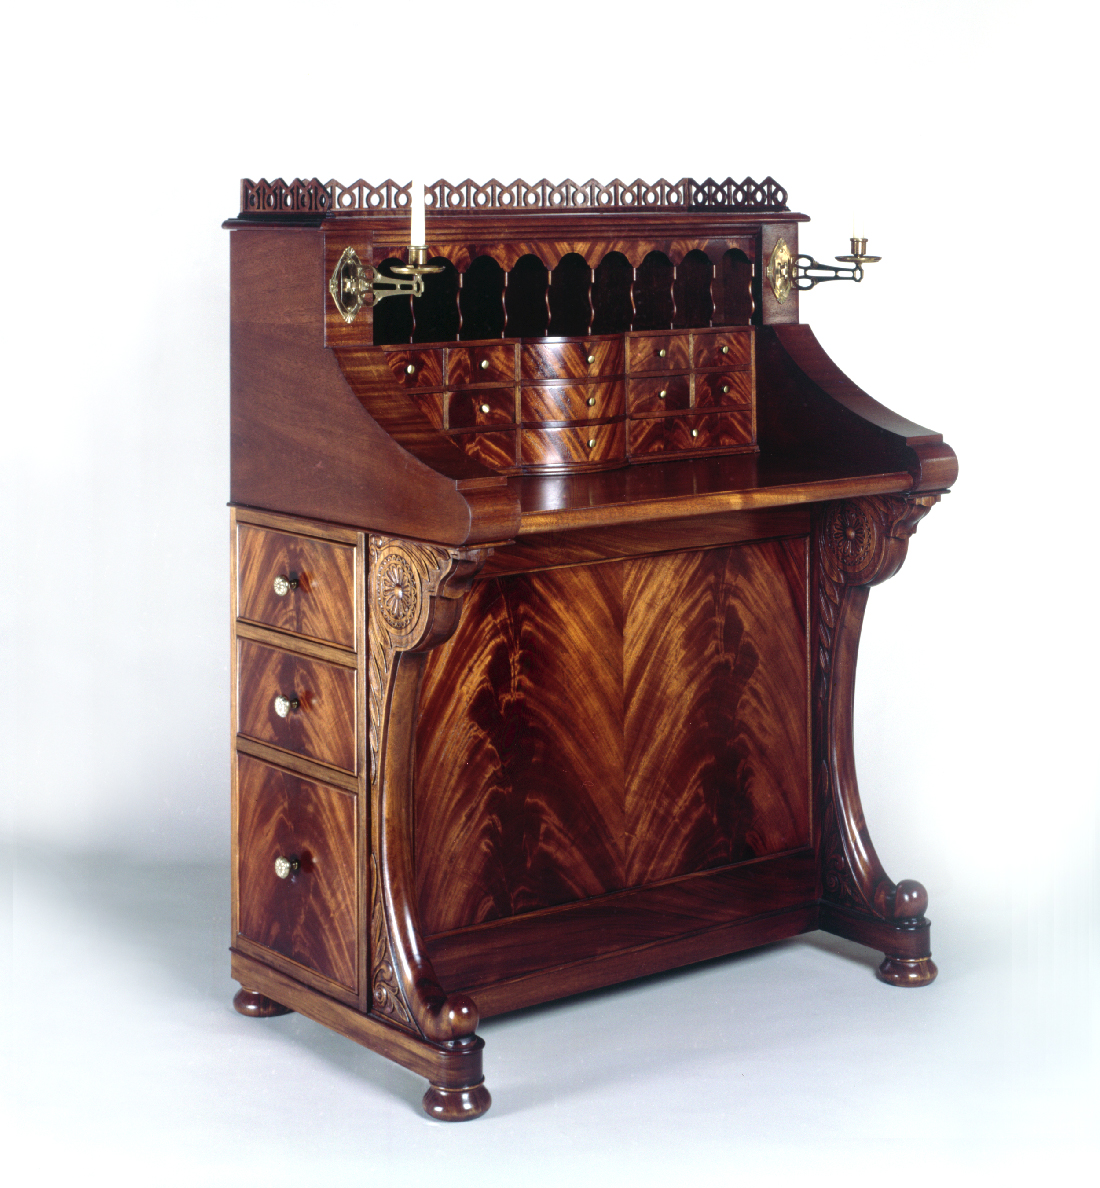 Davenport   An interpretation of the nineteenth century davenport style that includes hand carving, crotch mahogany veneer work, a slide-out desk, six drawers and a secret compartment.